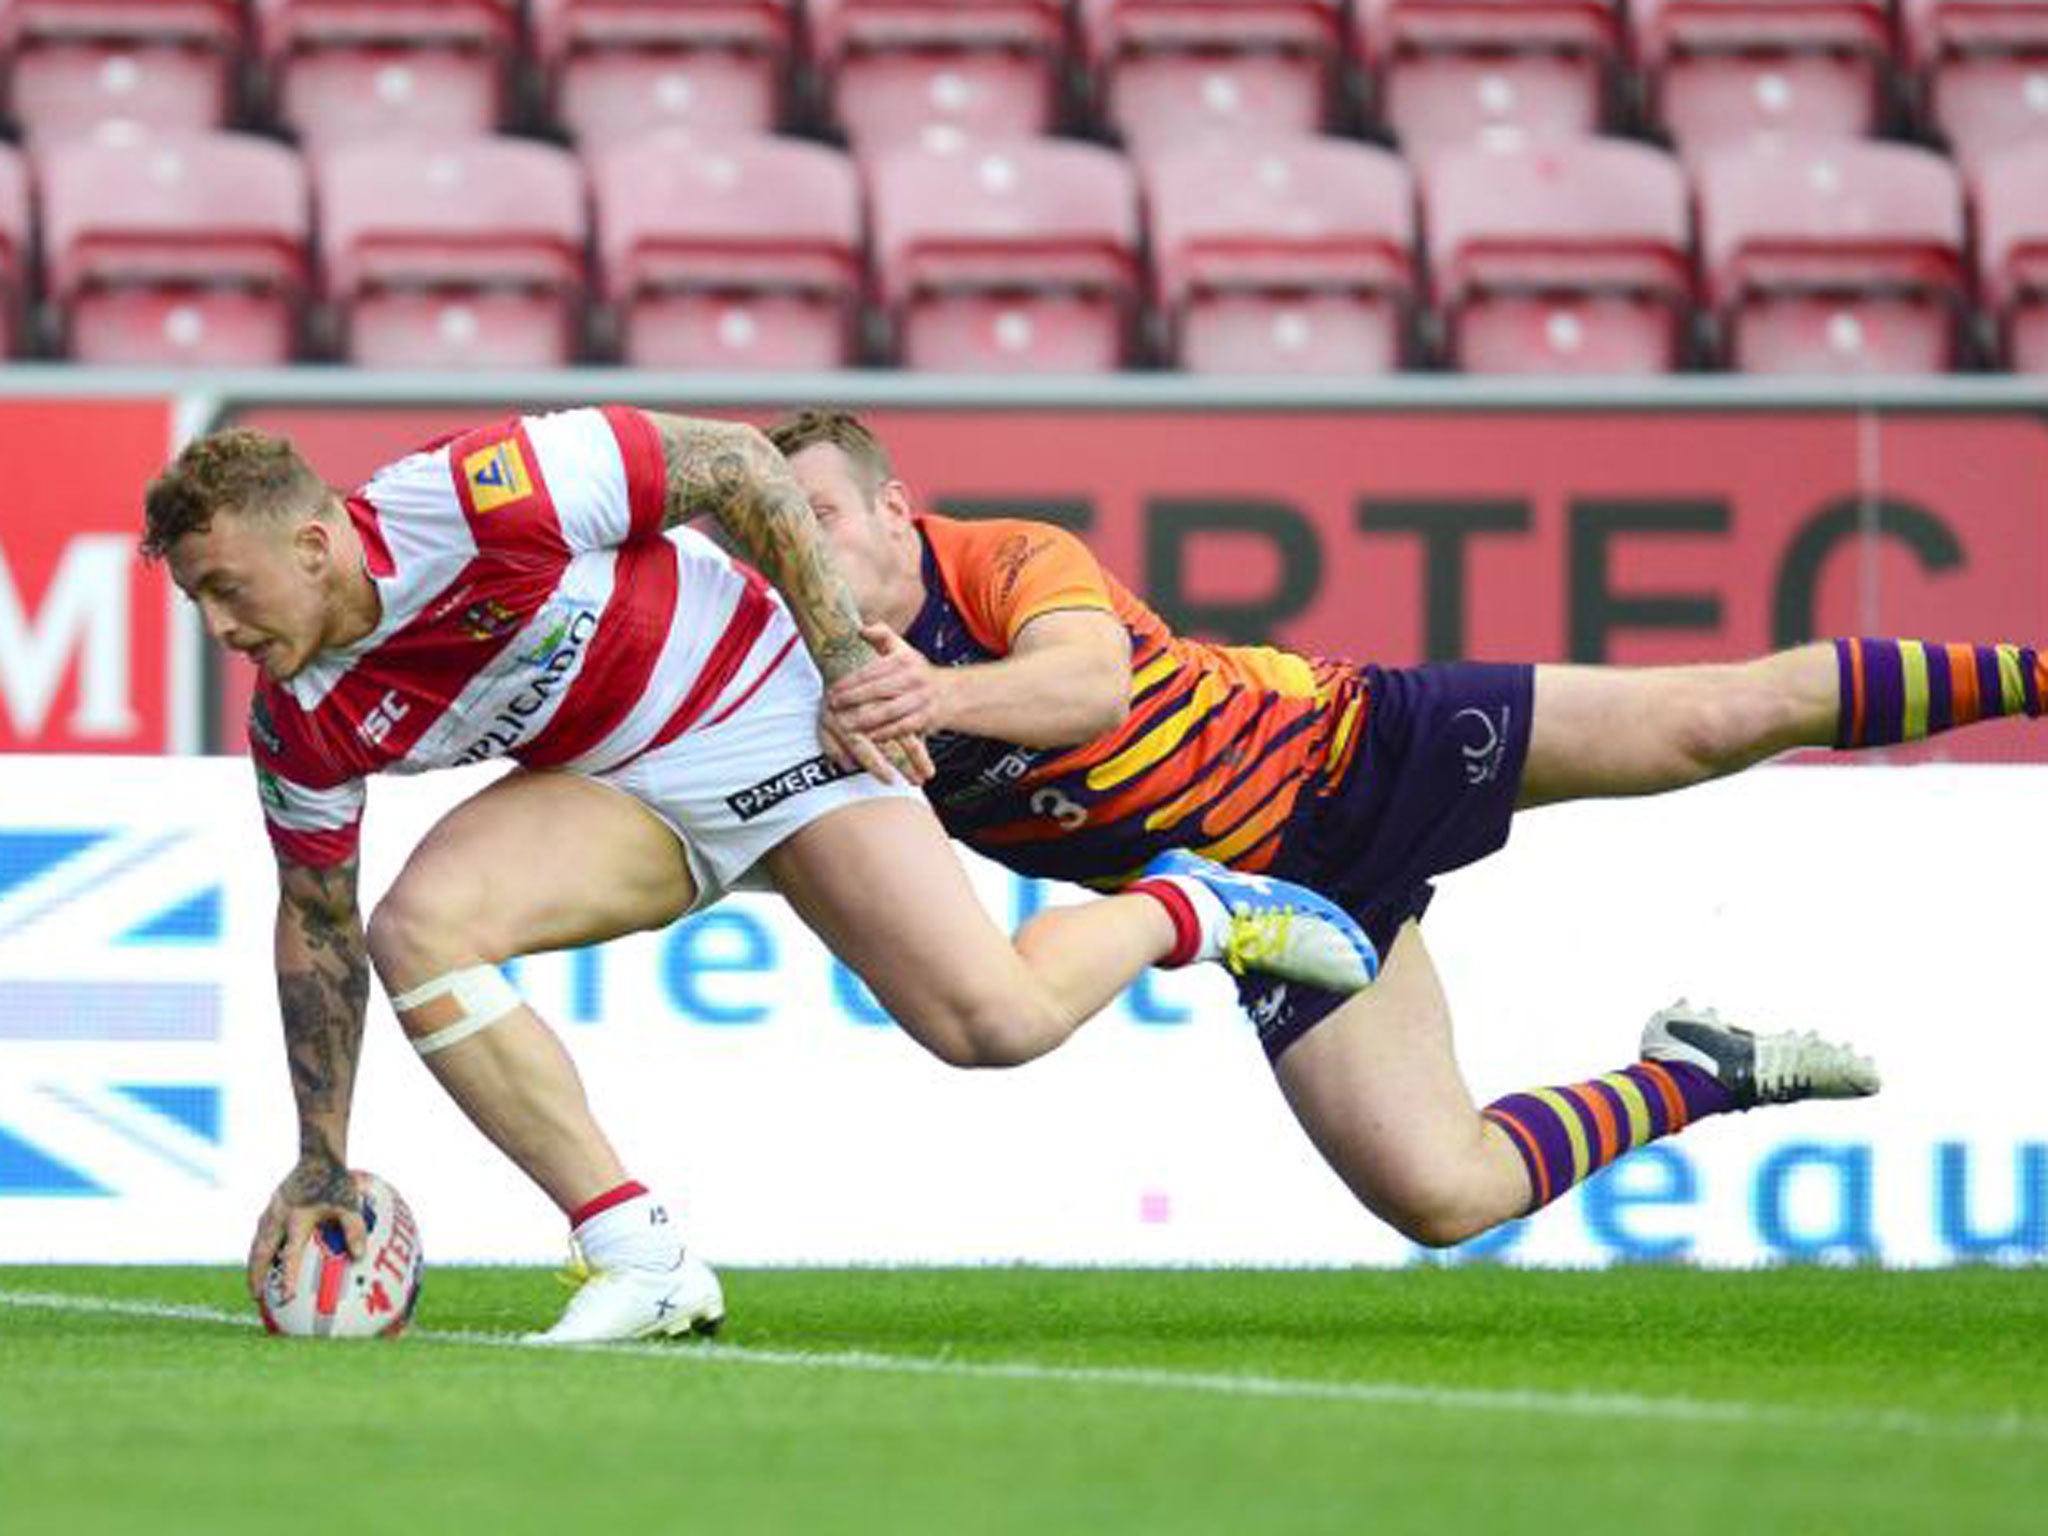 Wigan’s Josh Charnley crosses over for one of his three tries